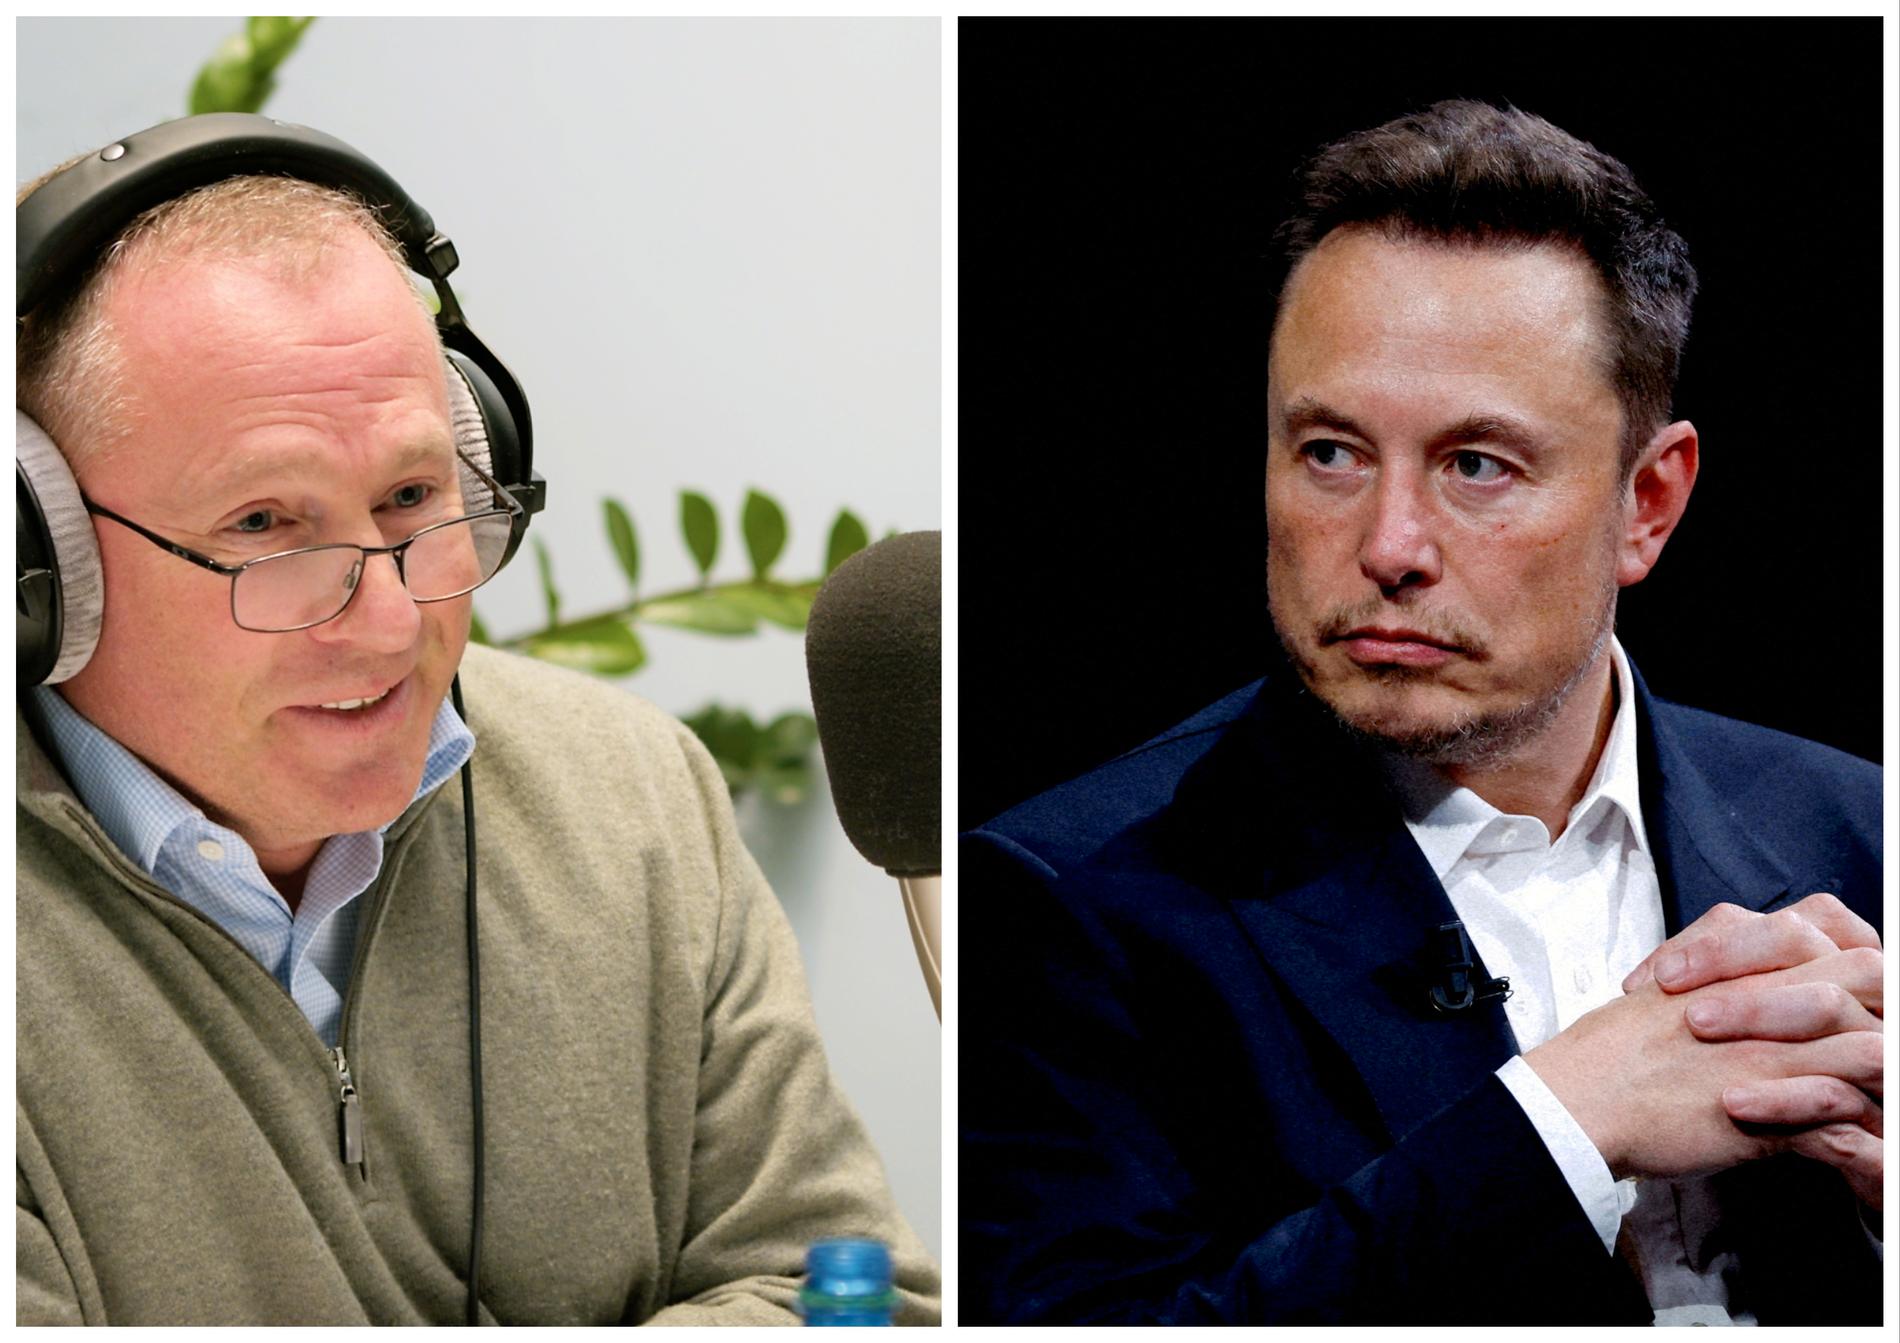 Tesla CEO Elon Musk discusses AI and electric cars on Nicolai Tangen’s podcast